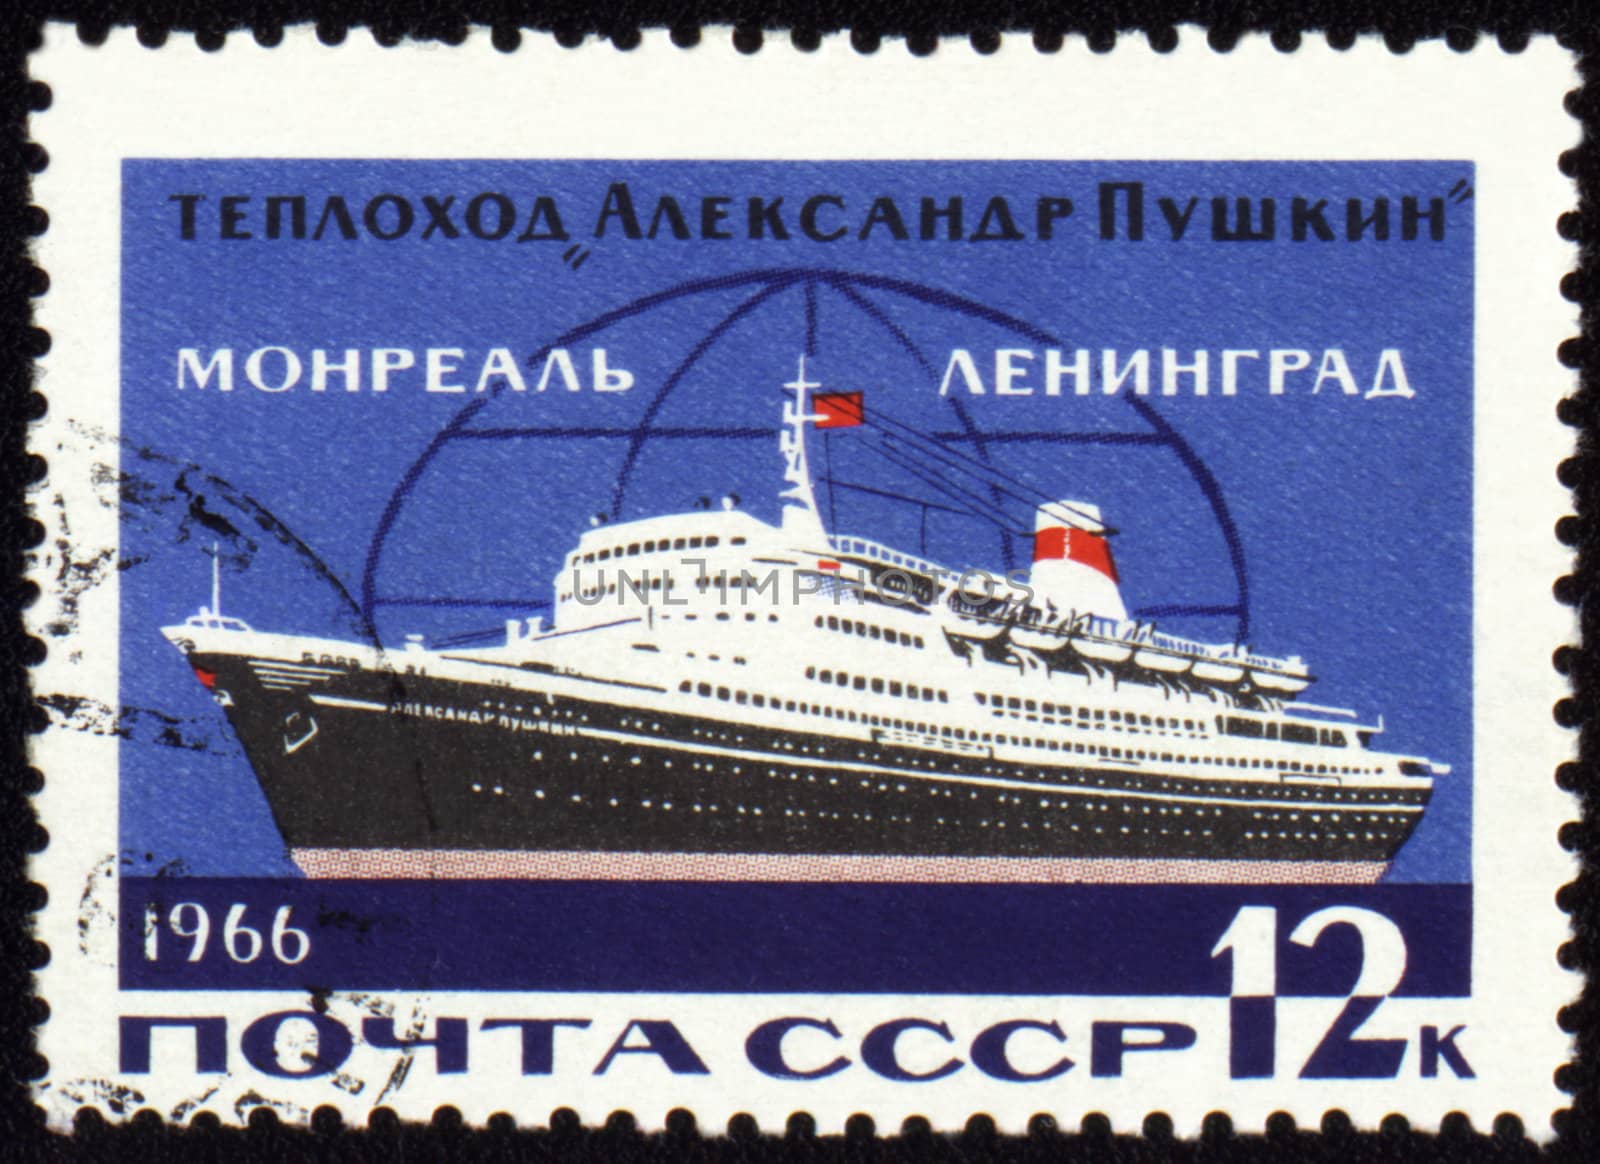 Passenger ship "Alexander Pushkin" on the line to Leningrad, Montreal on post stamp by wander